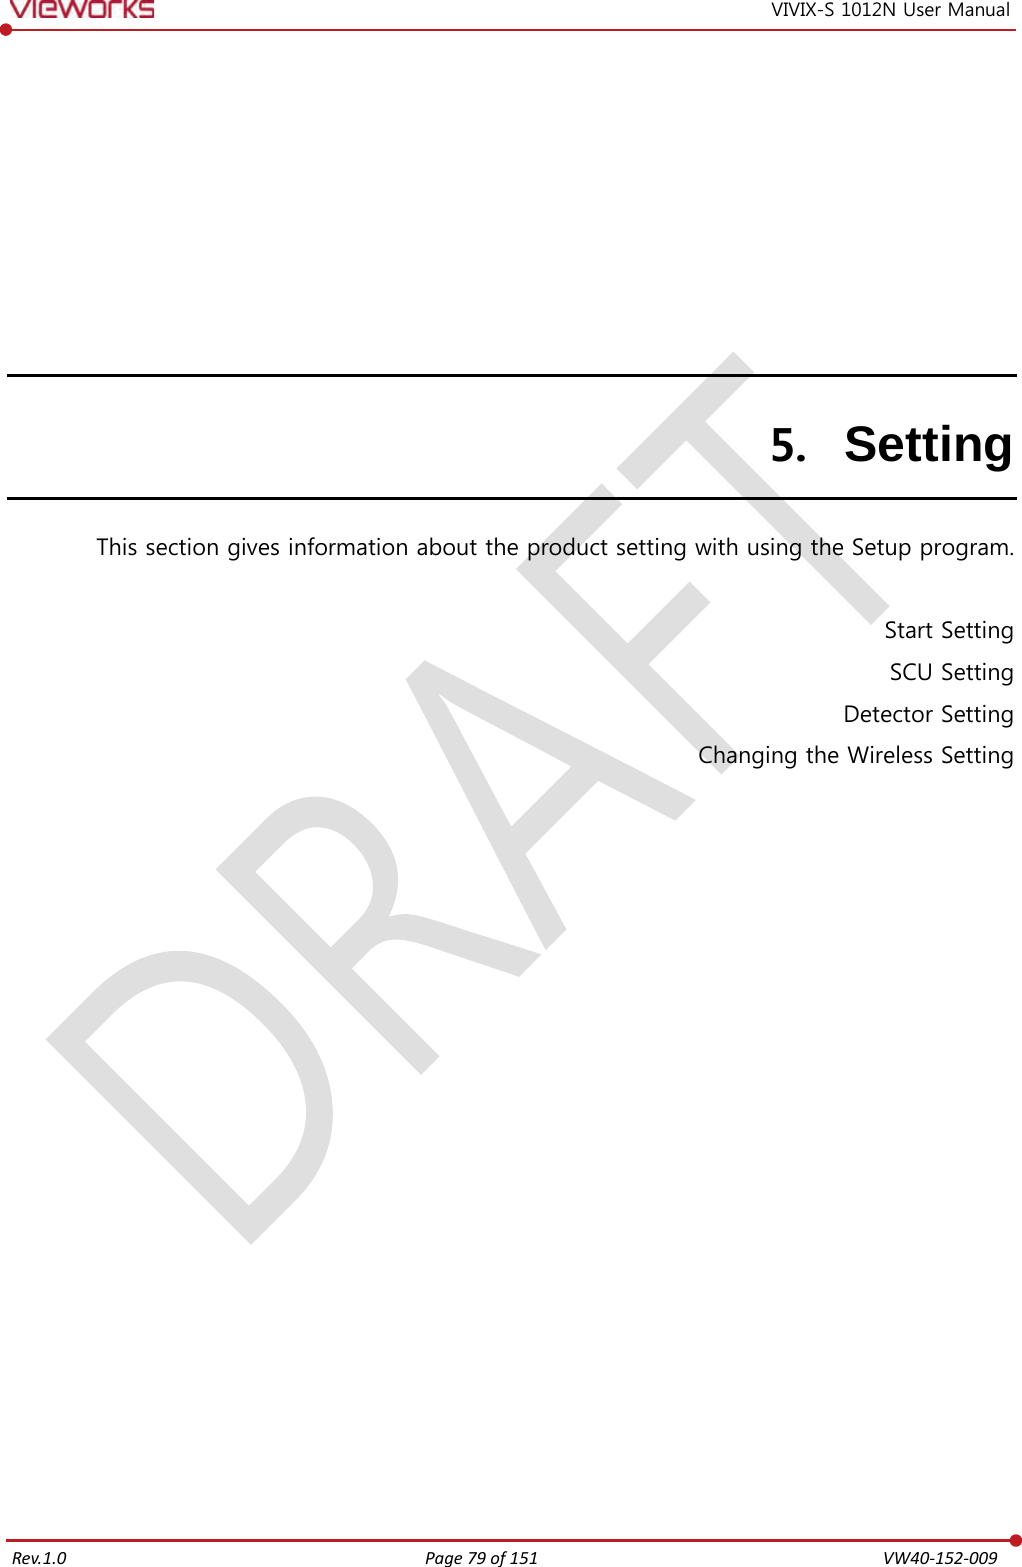   Rev.1.0 Page 79 of 151  VW40-152-009 VIVIX-S 1012N User Manual 5. Setting This section gives information about the product setting with using the Setup program.  Start Setting SCU Setting Detector Setting Changing the Wireless Setting   